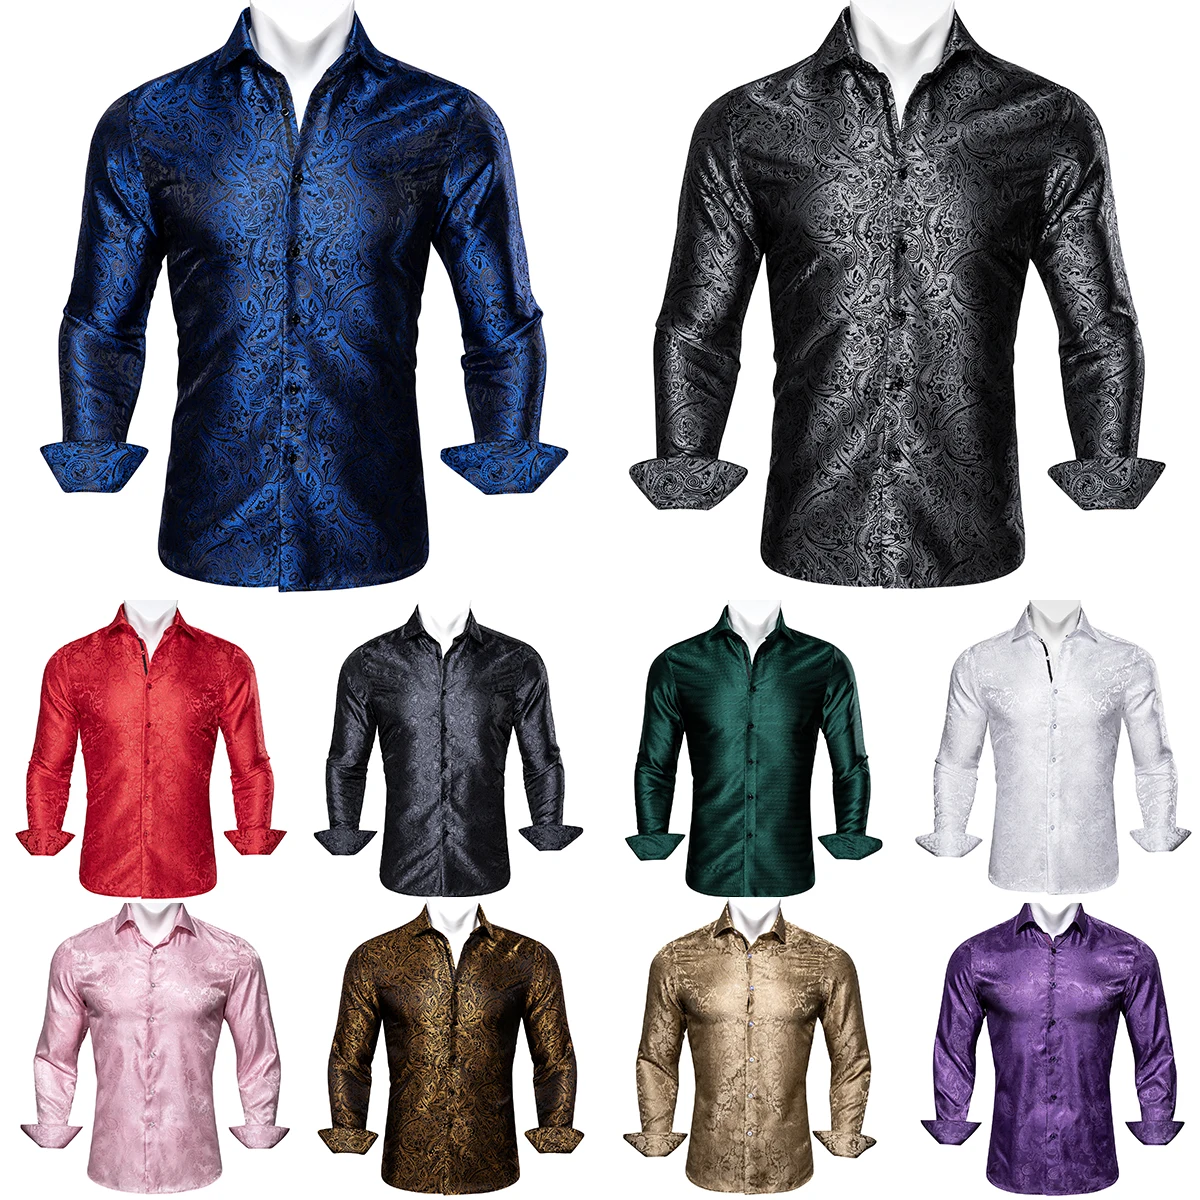 Designer Silk Shirts for Men Blue Black Red Green White Gold Pink Brown Purple Paisley Flower Long Sleeve Spring Slim Tops yo cho boutonnieres silk roses white pink wedding corsages and boutonnieres groom flower boutonnieres marriage prom brooch pins